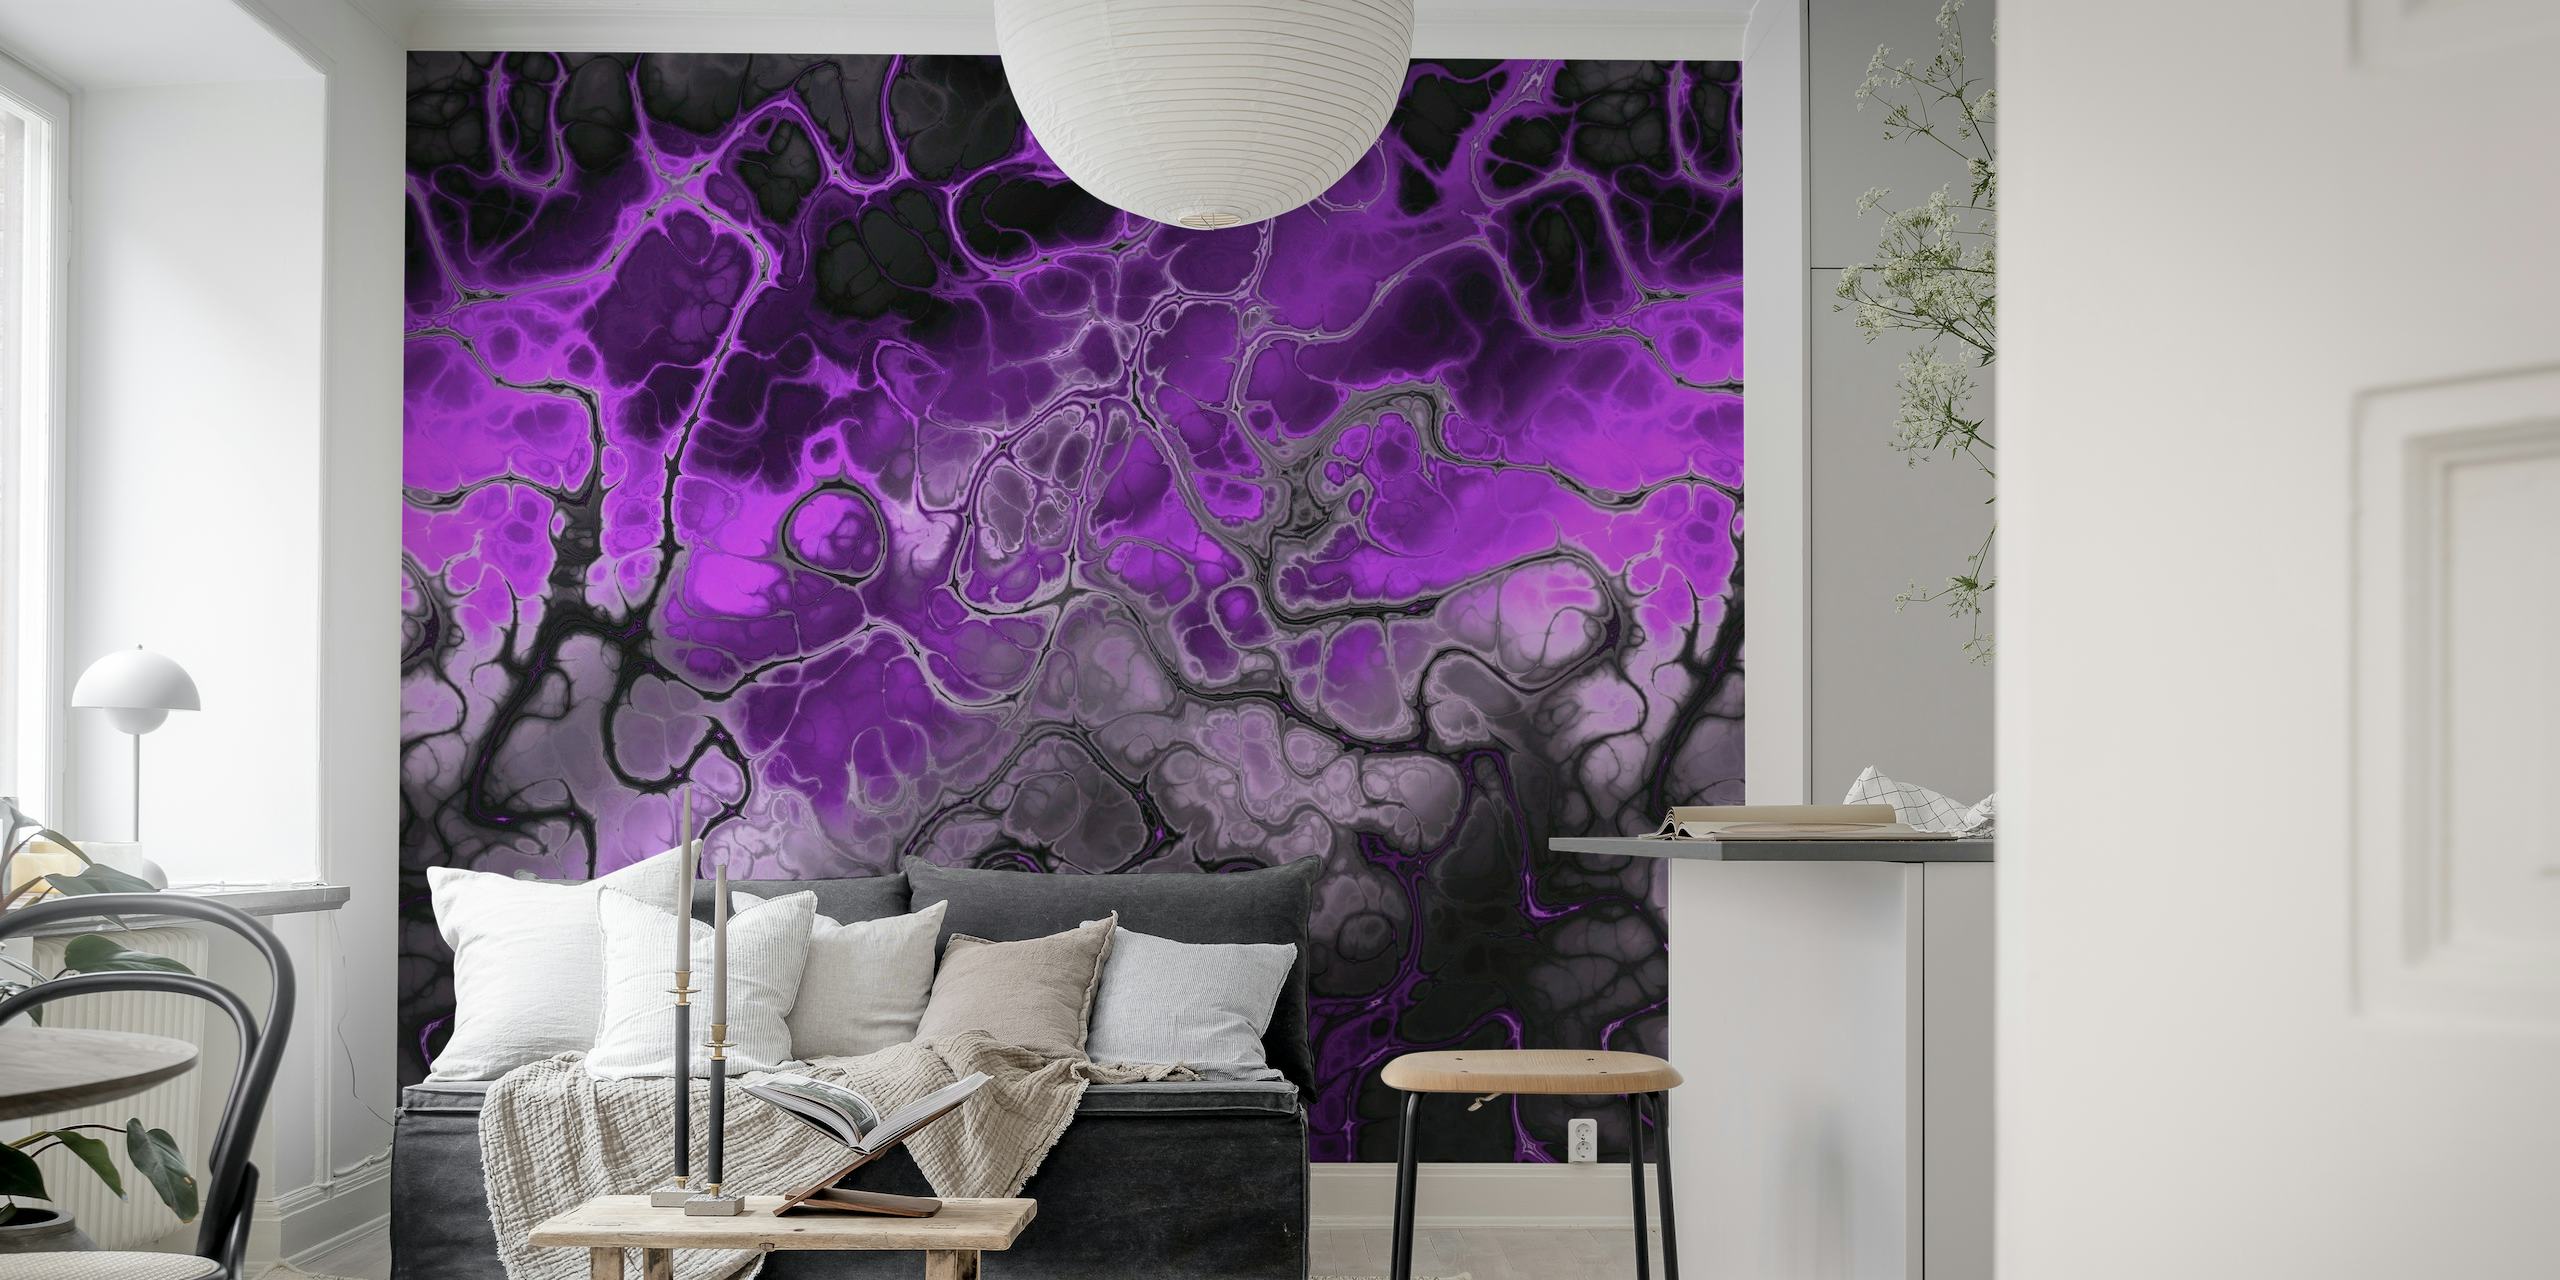 Intricate purple and black marble fractal pattern wall mural